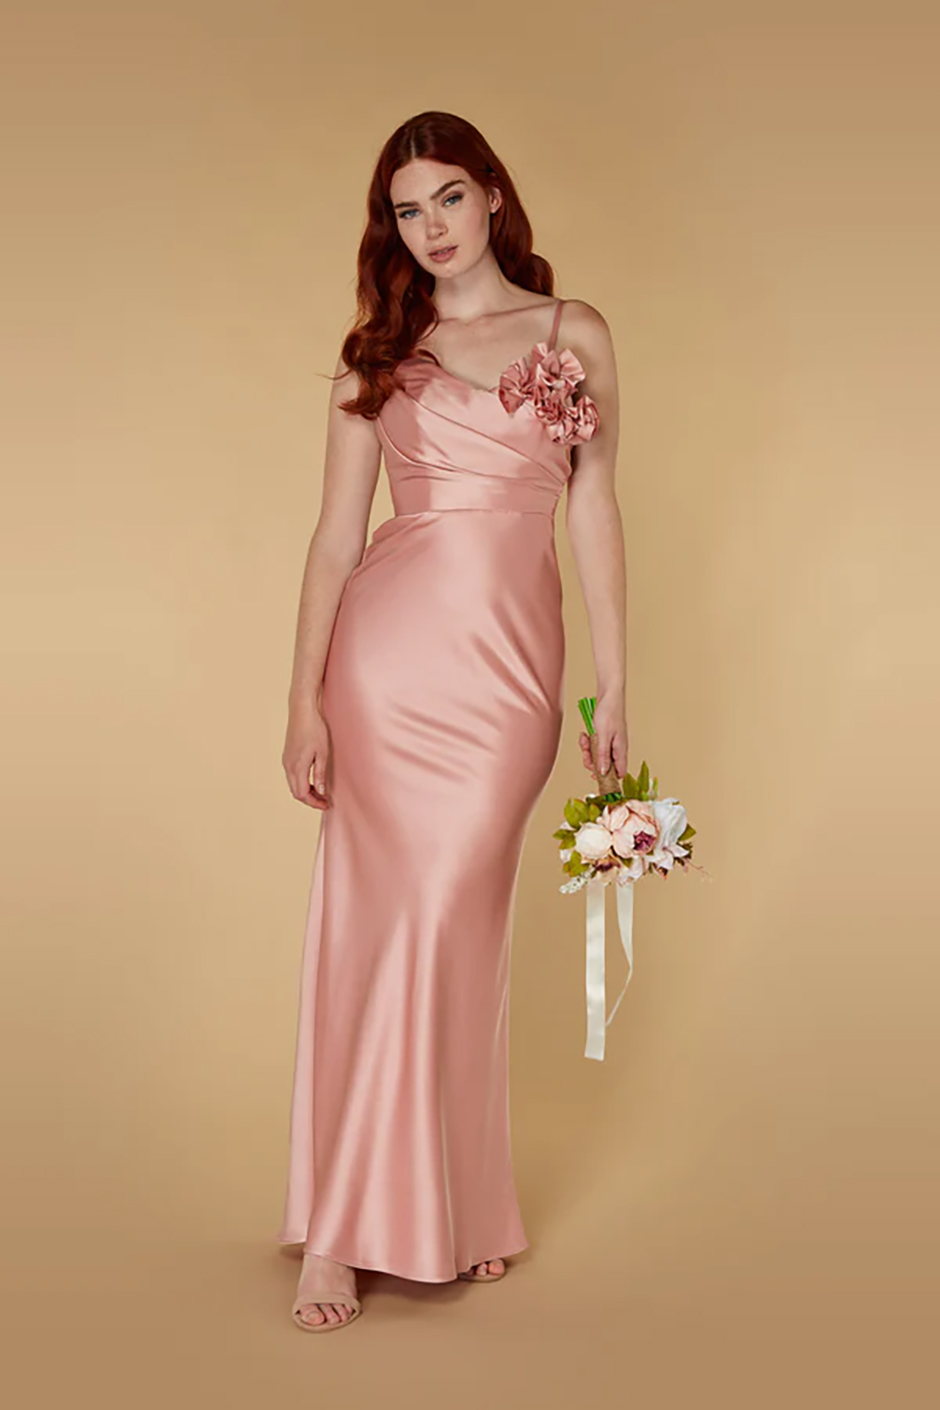 Spring bridesmaid dress from Jarlo - blush satin one shoulder maxi dress with floral applique by the shoulder